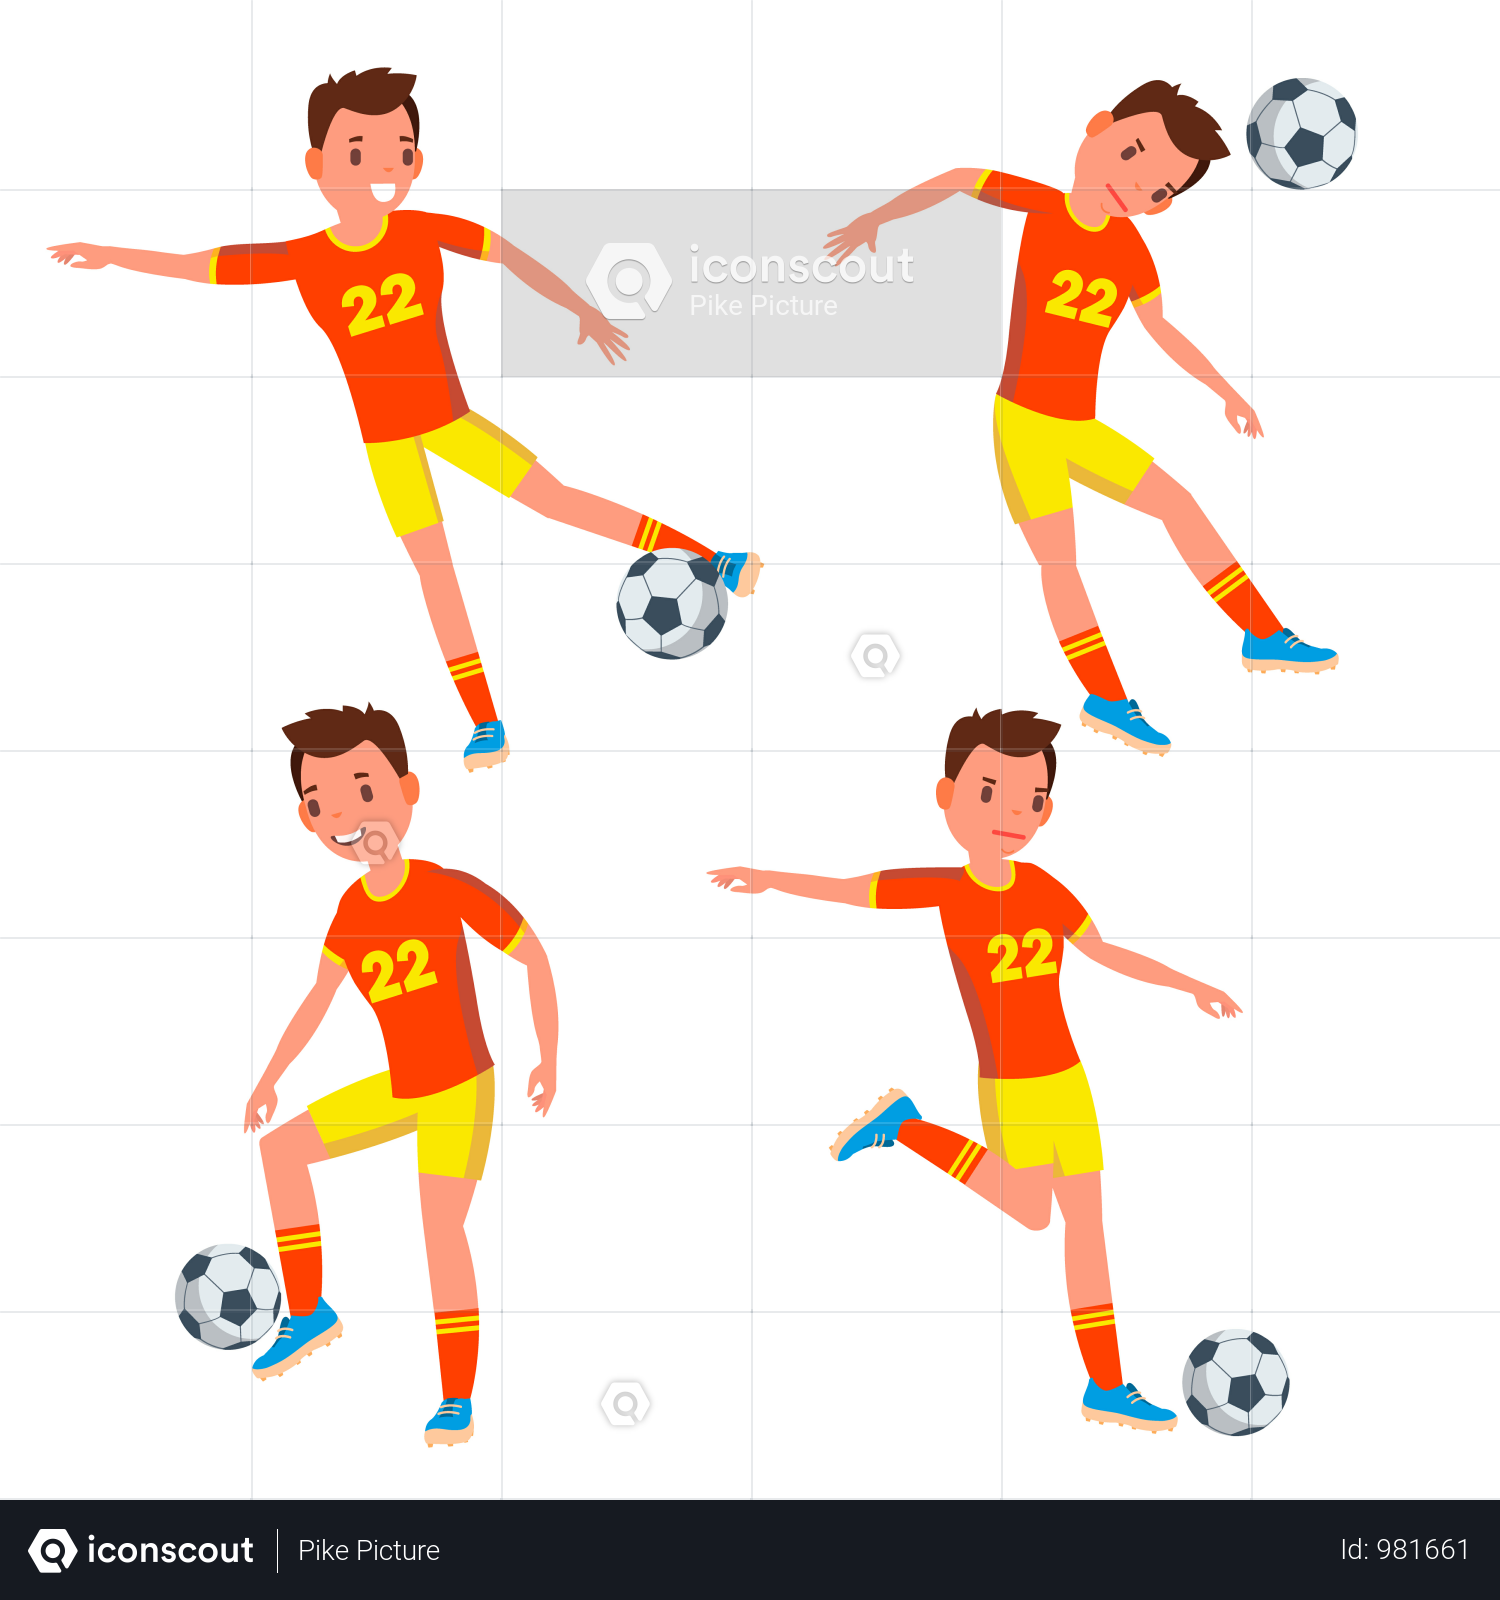 Soccer kick. Athletic male in the air kicking a soccer ball #Sponsored ,  #SPONSORED, #sponsored, #kick, #male, #soccer, #Athletic | Soccer poses,  Kicks, Soccer